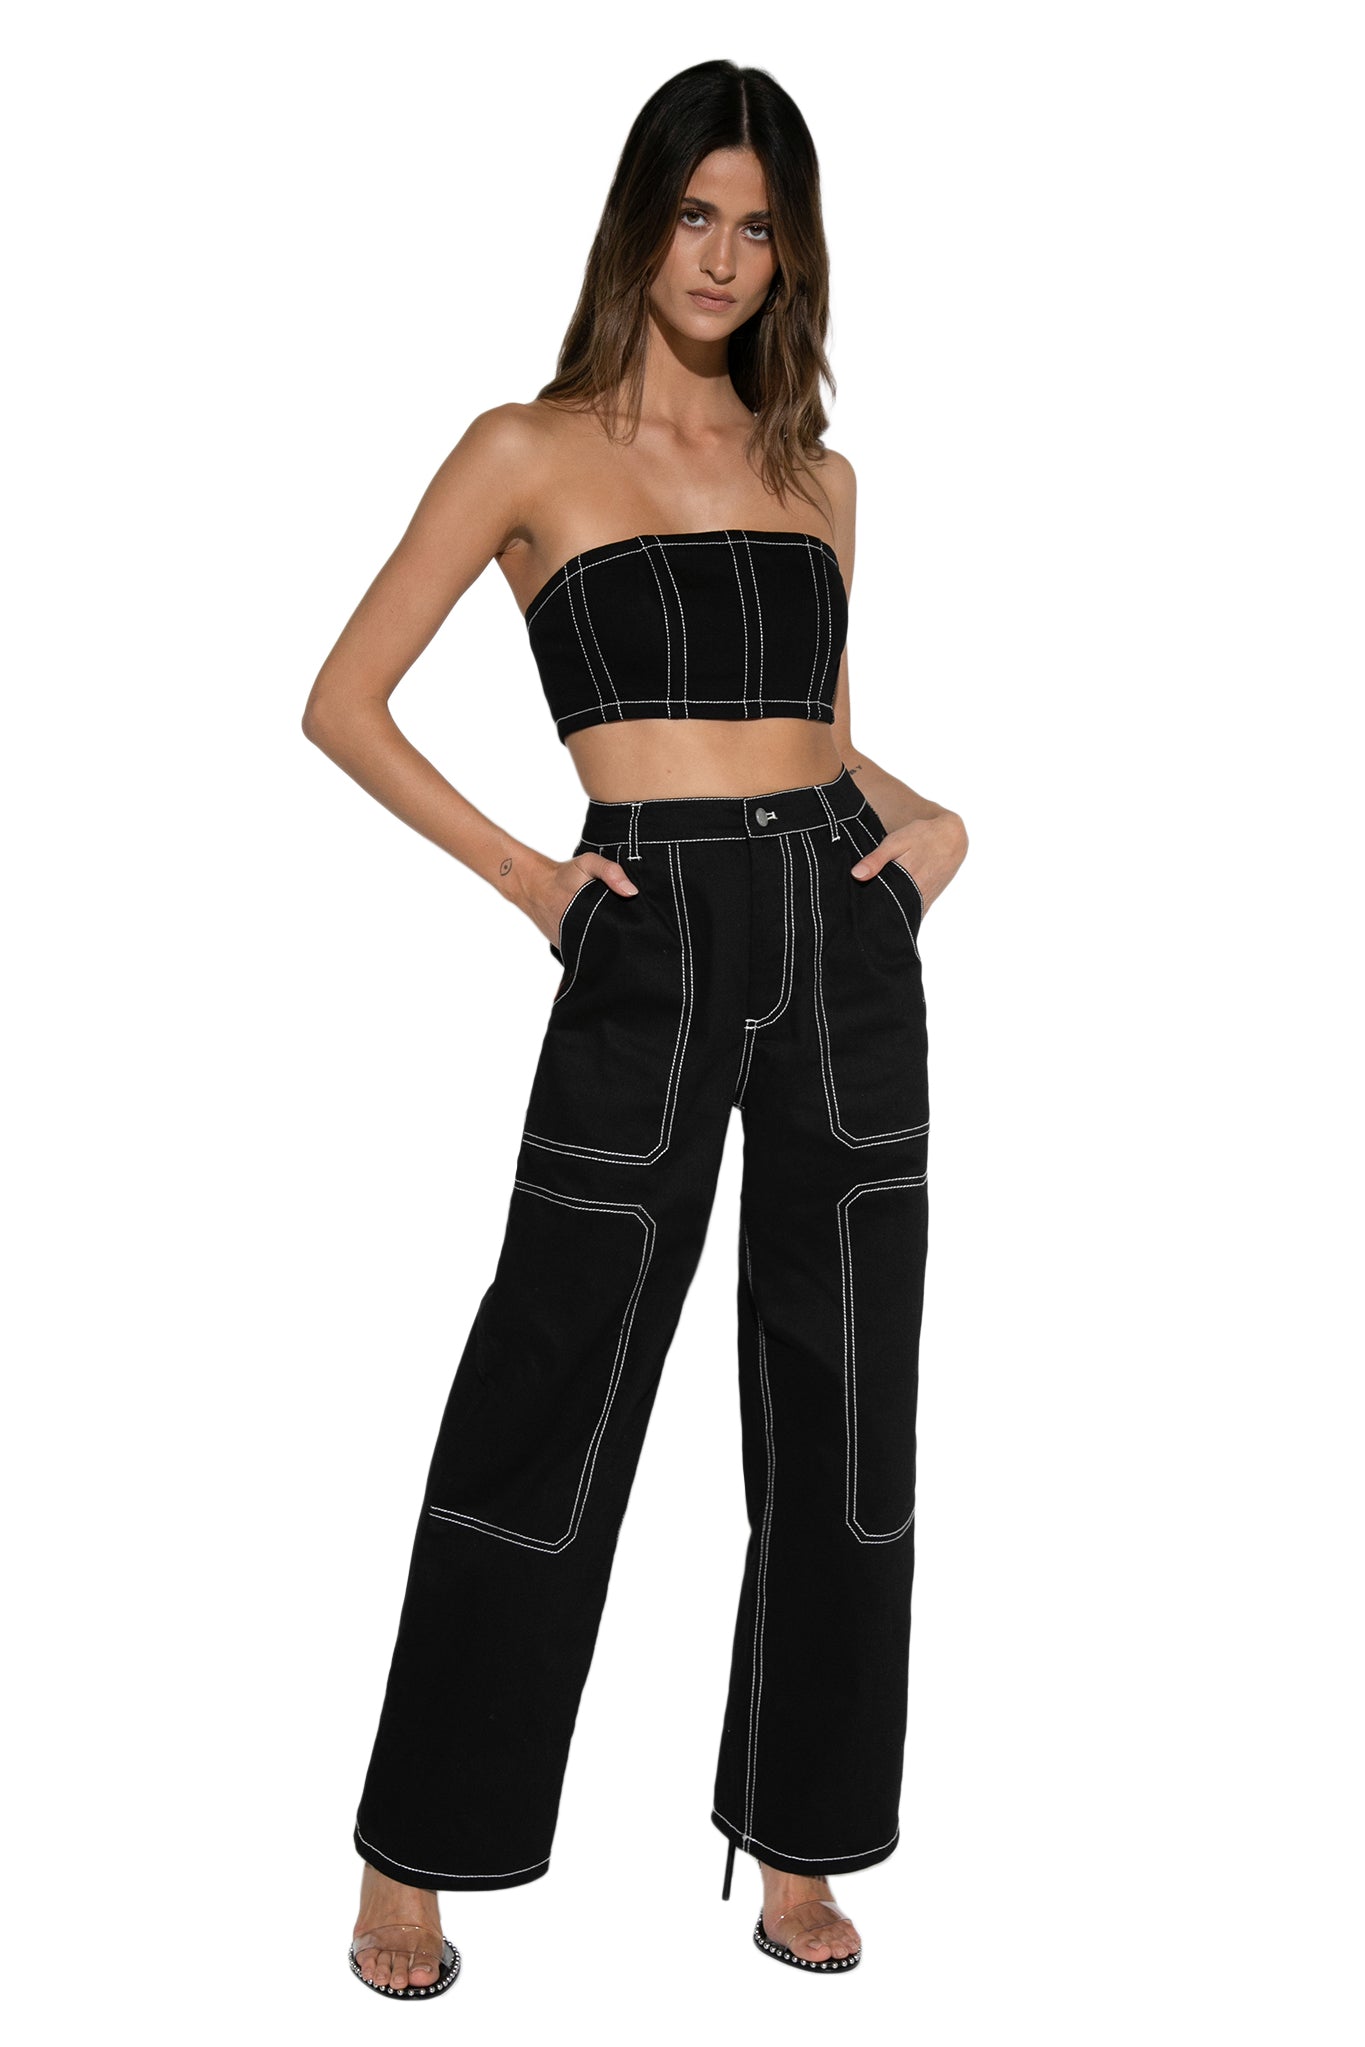 BY.DYLN Jodie Corset Top in Black ($69) and BY.DYLN Ella Pants